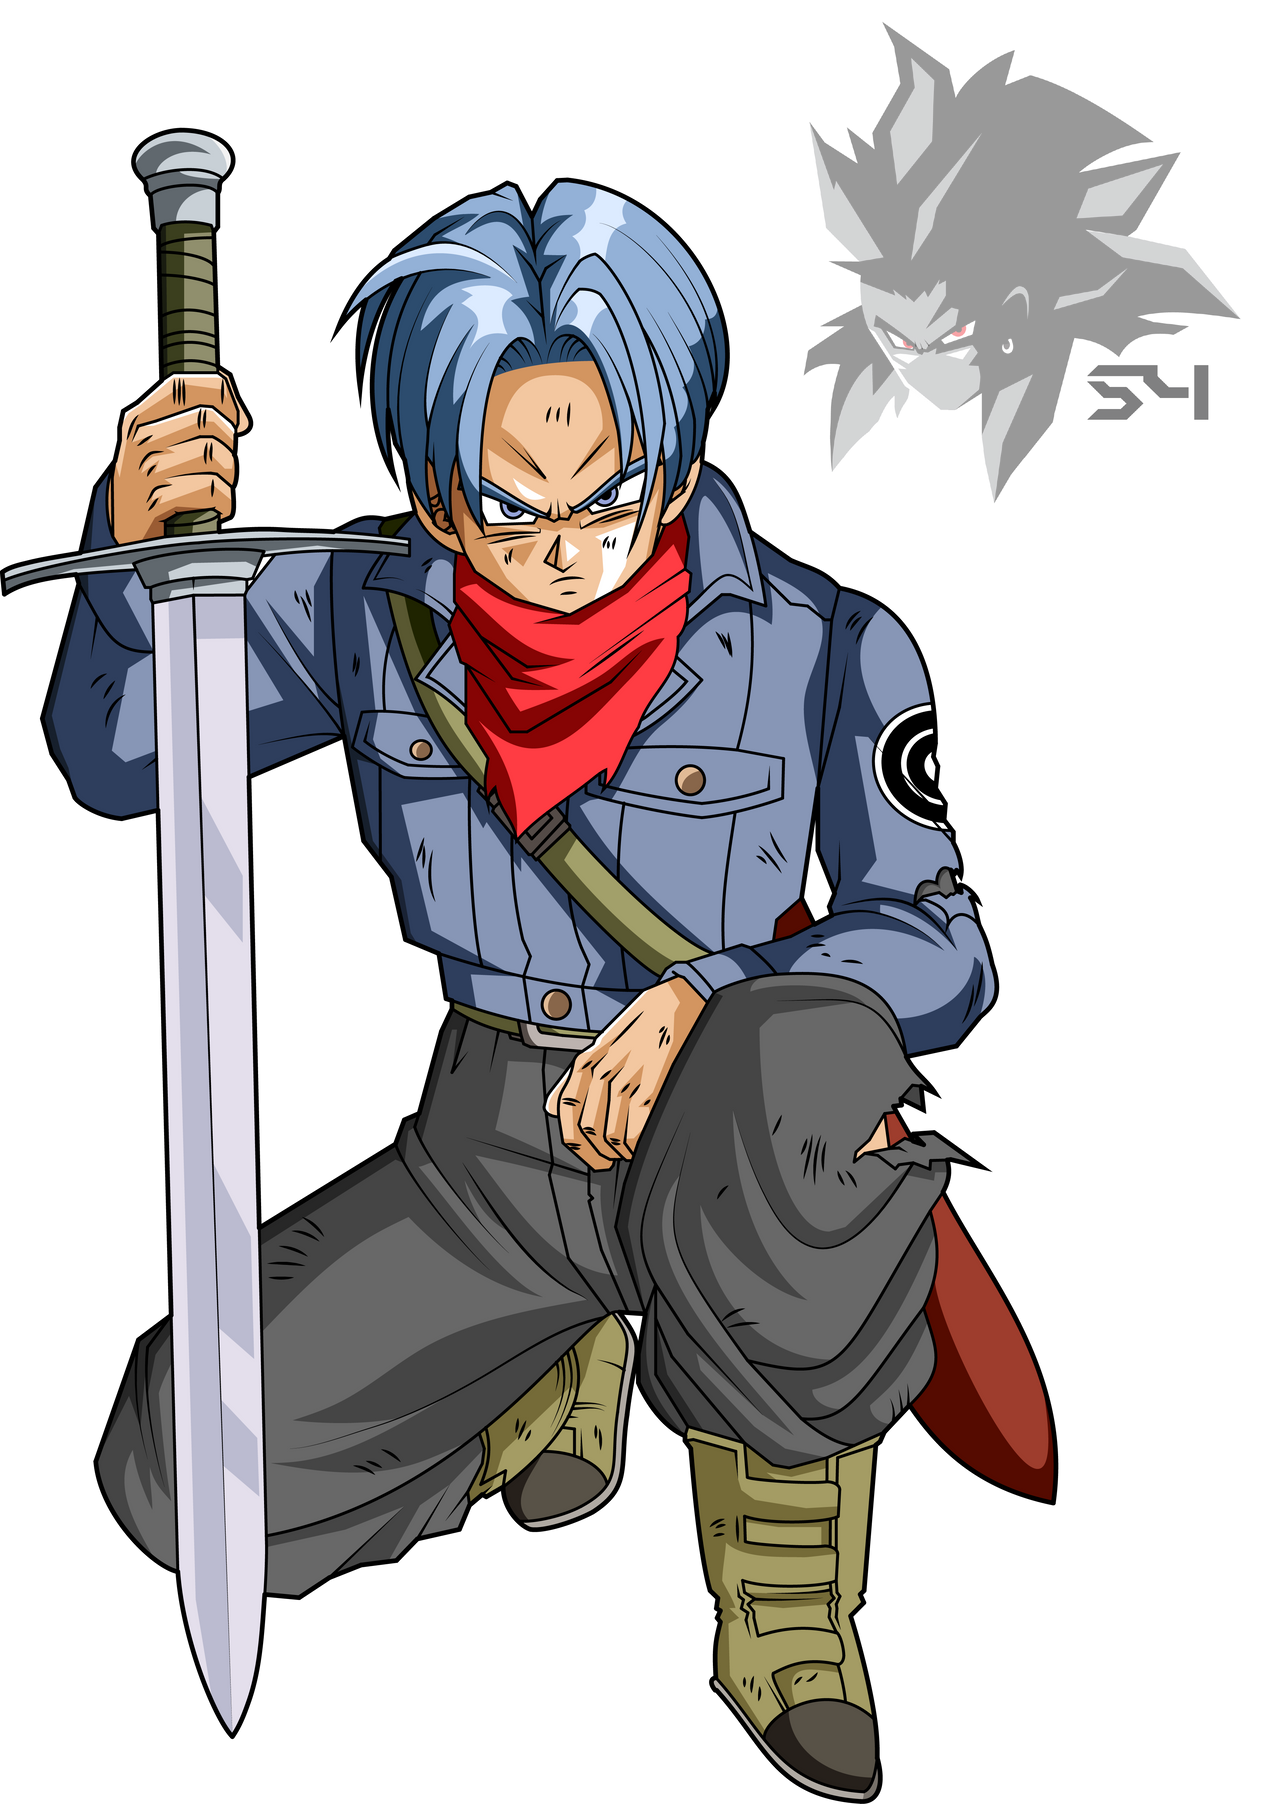 Future Trunks Dragon Ball Super By Mad-54 On Deviantart